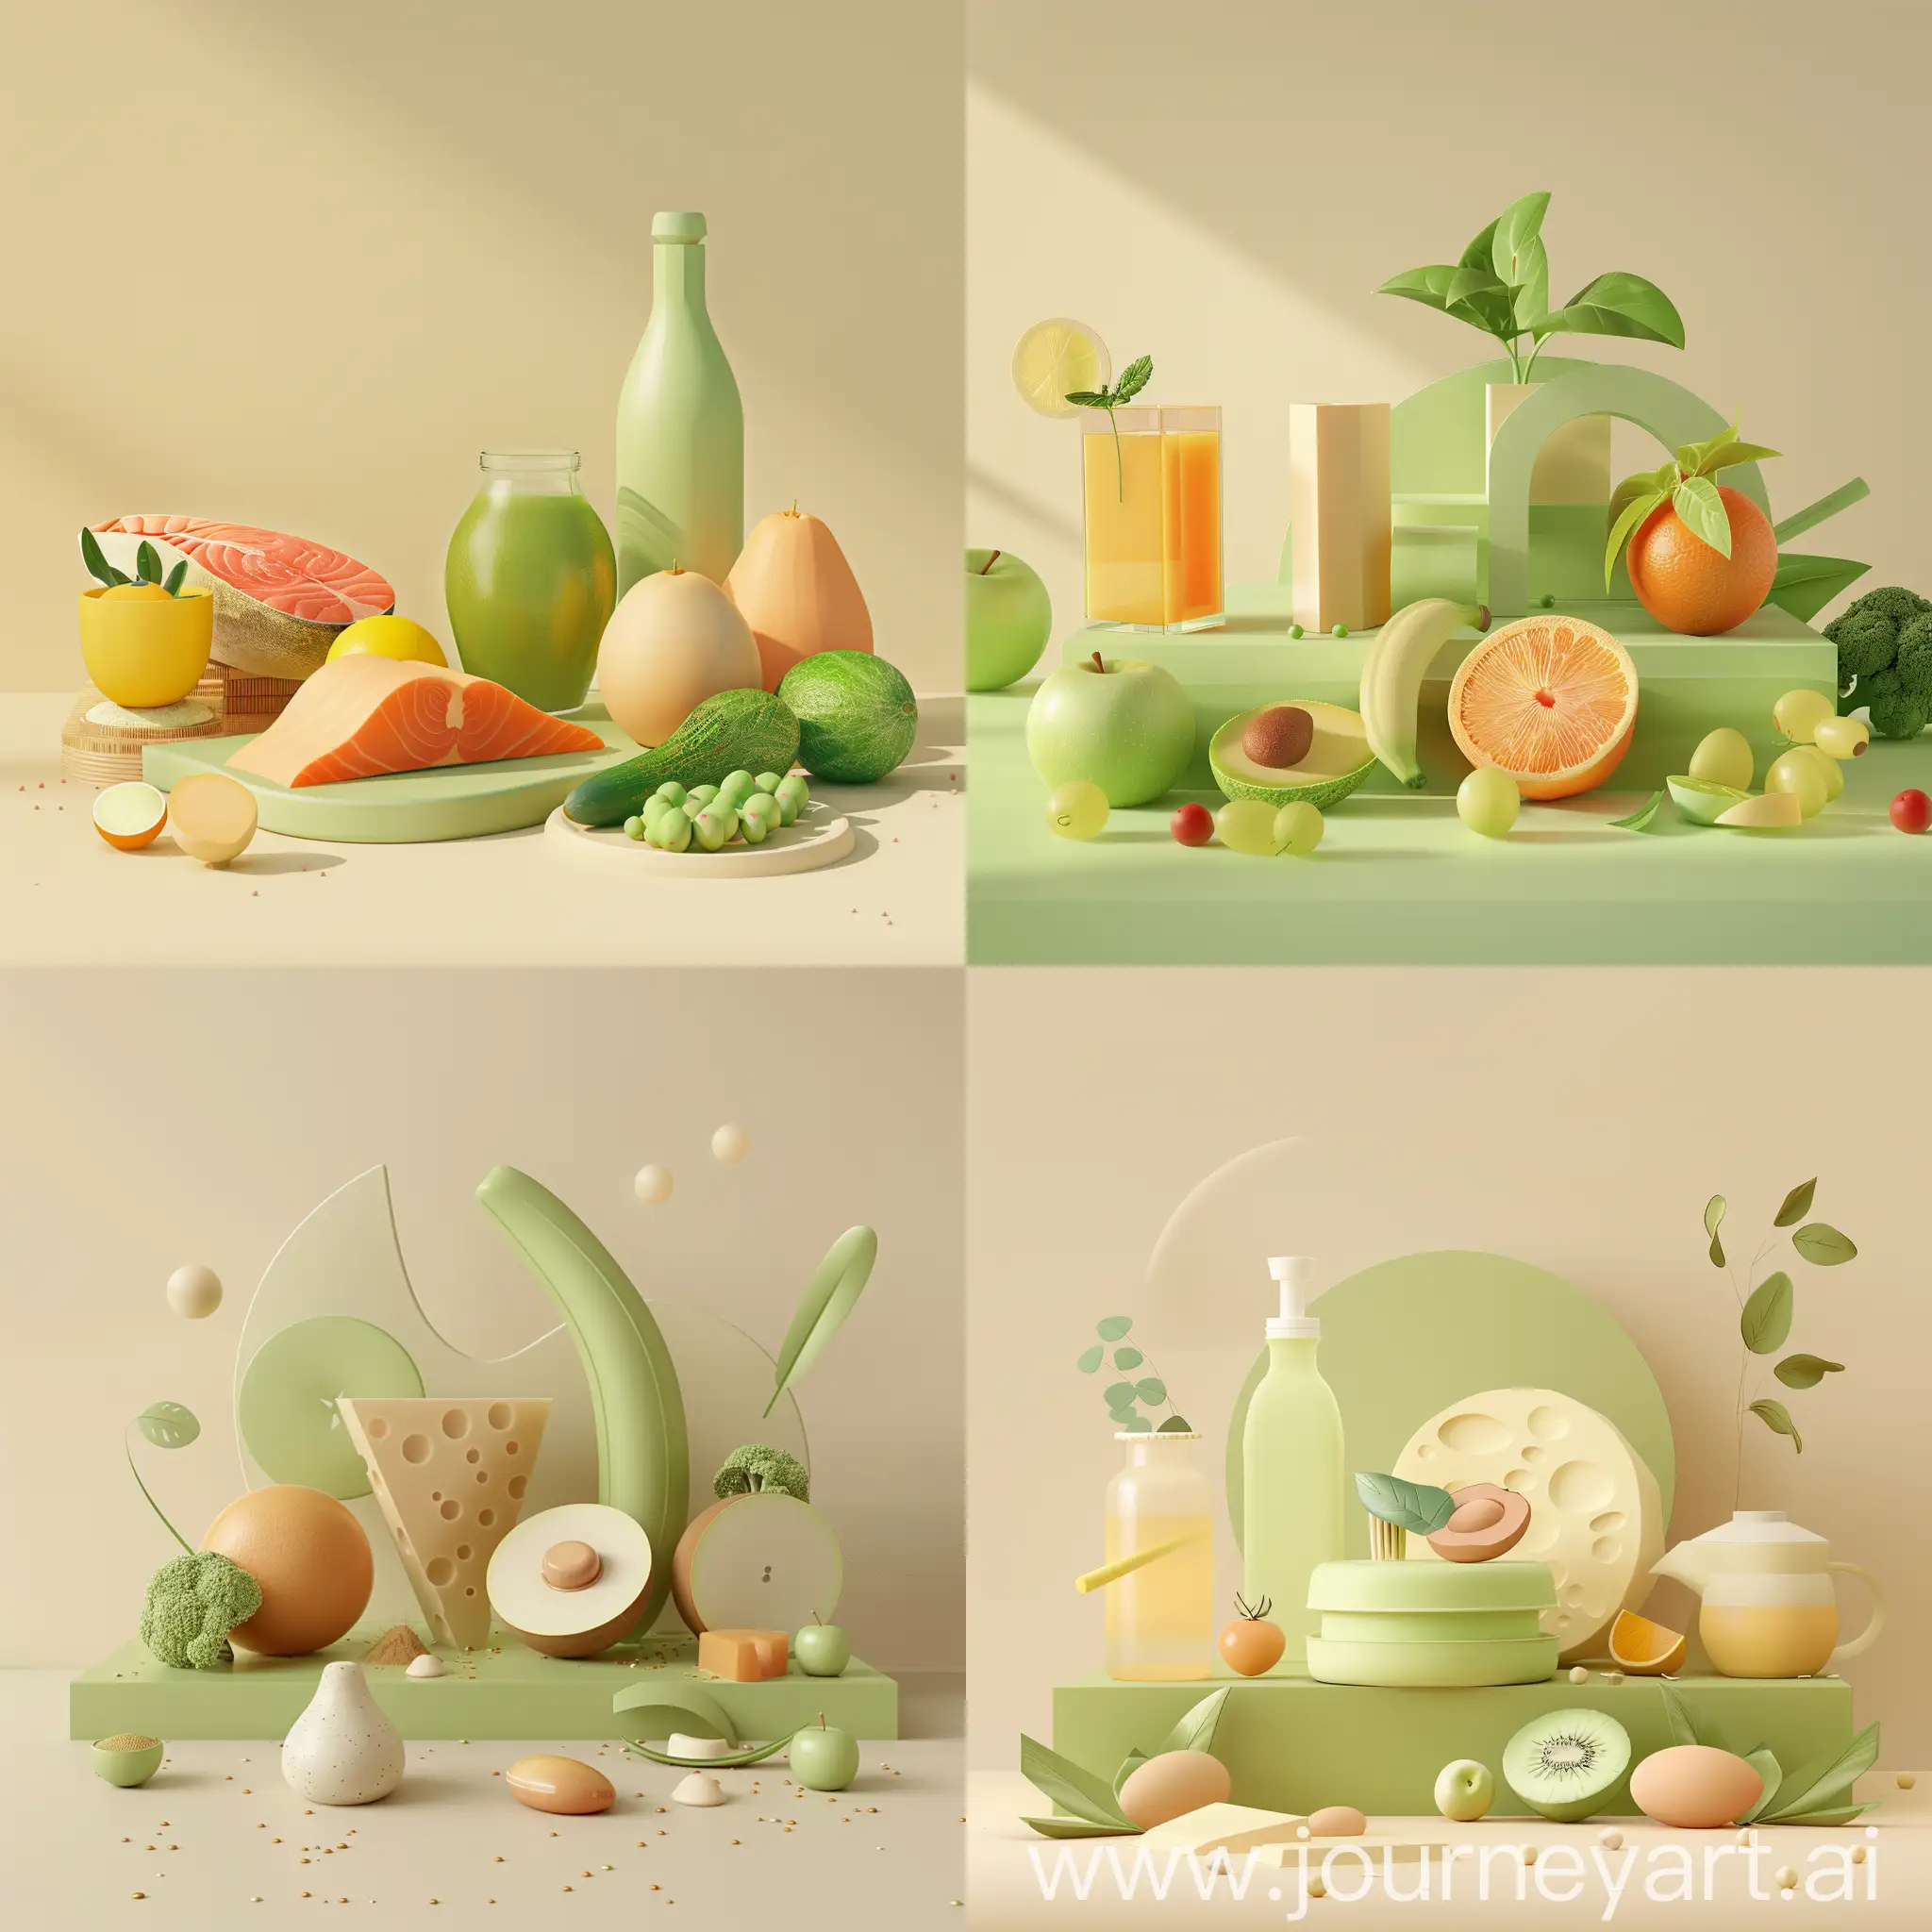 Minimalist-3D-Illustration-of-Healthy-Food-Soft-Lines-and-Shapes-in-Gradient-Green-and-Beige-Theme